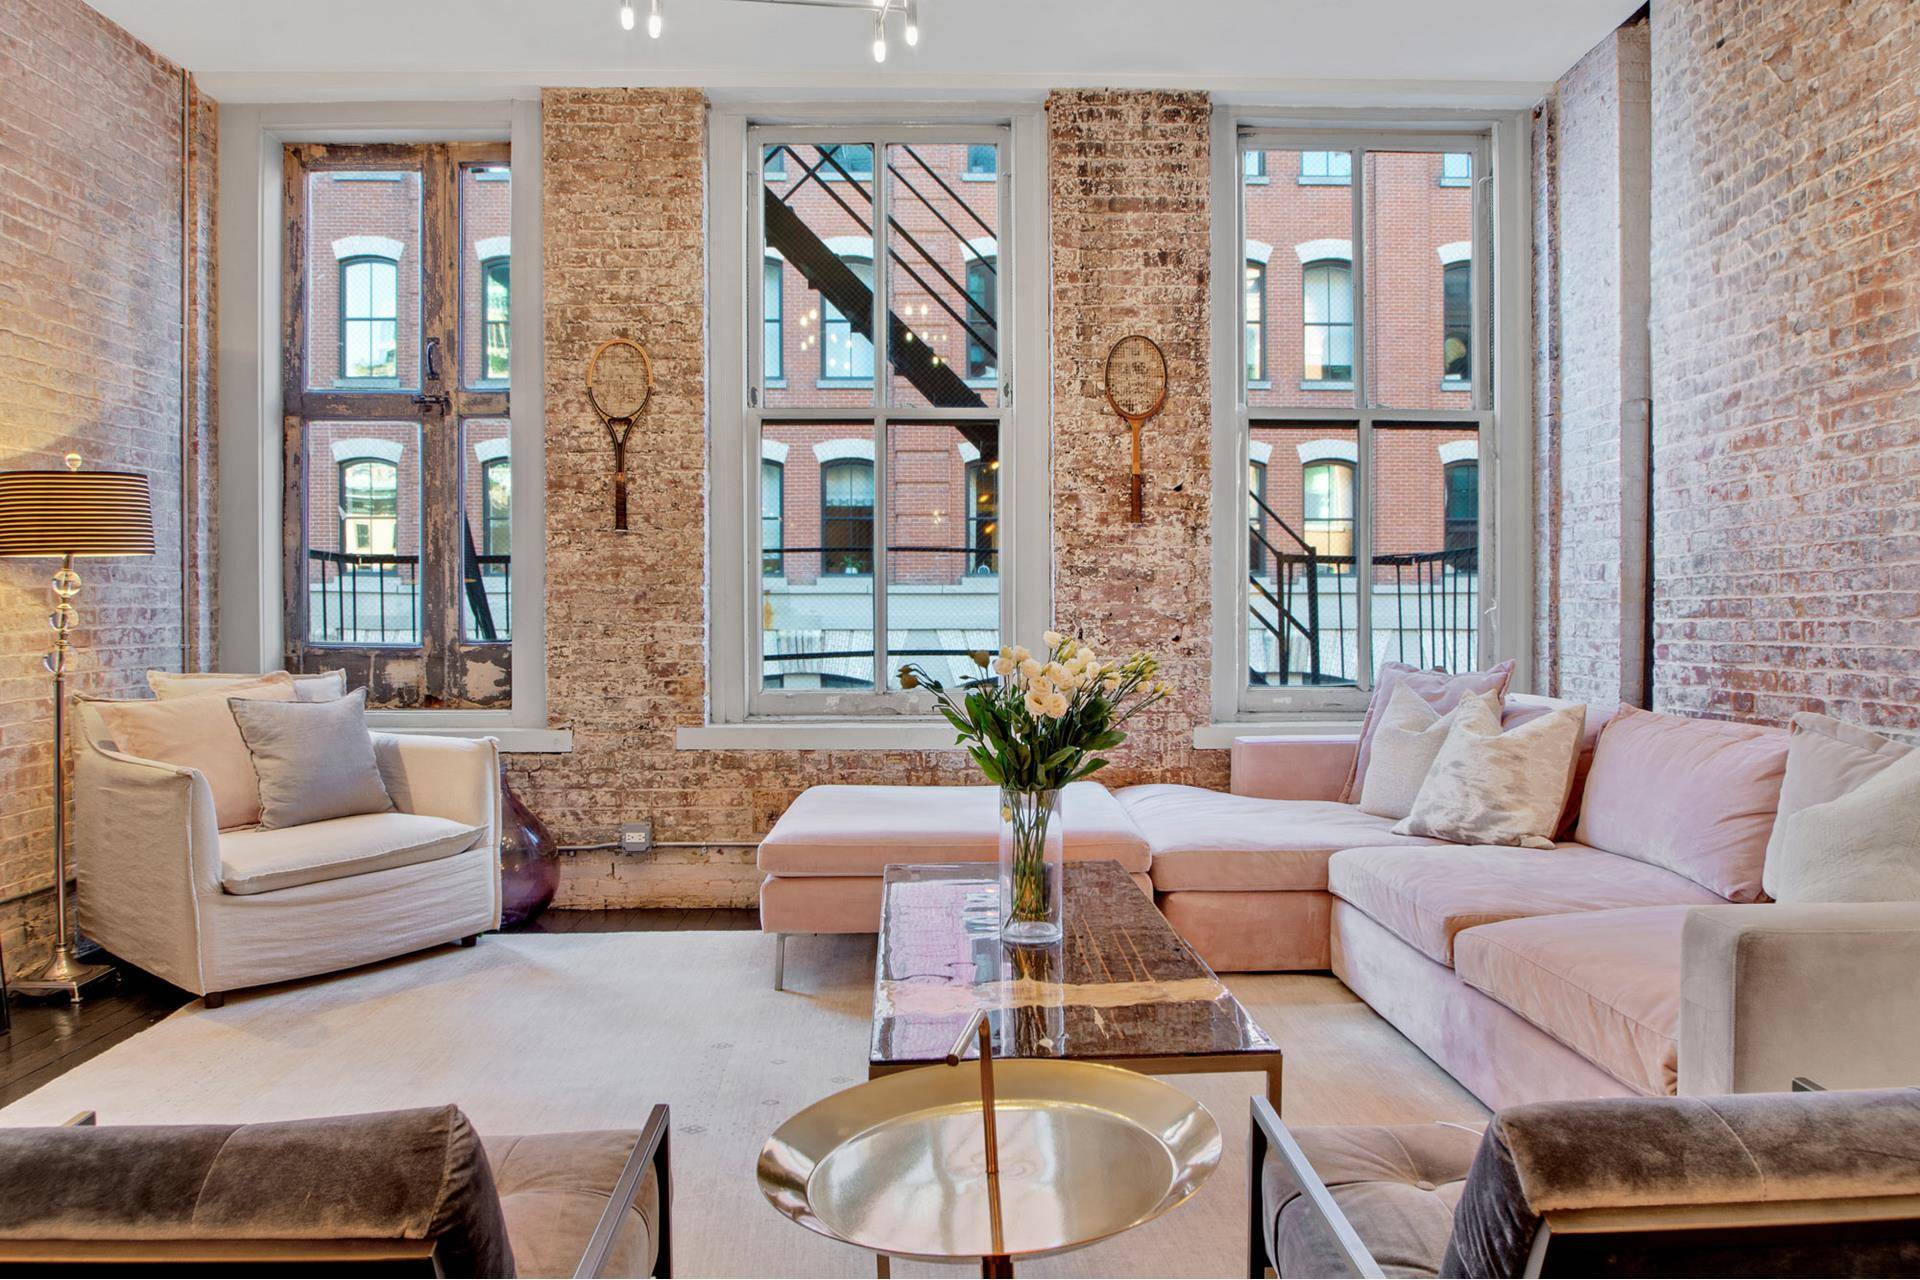 Fashion lovers will swoon for this completely turn key Tribeca loft, renovated with a designer's eye.